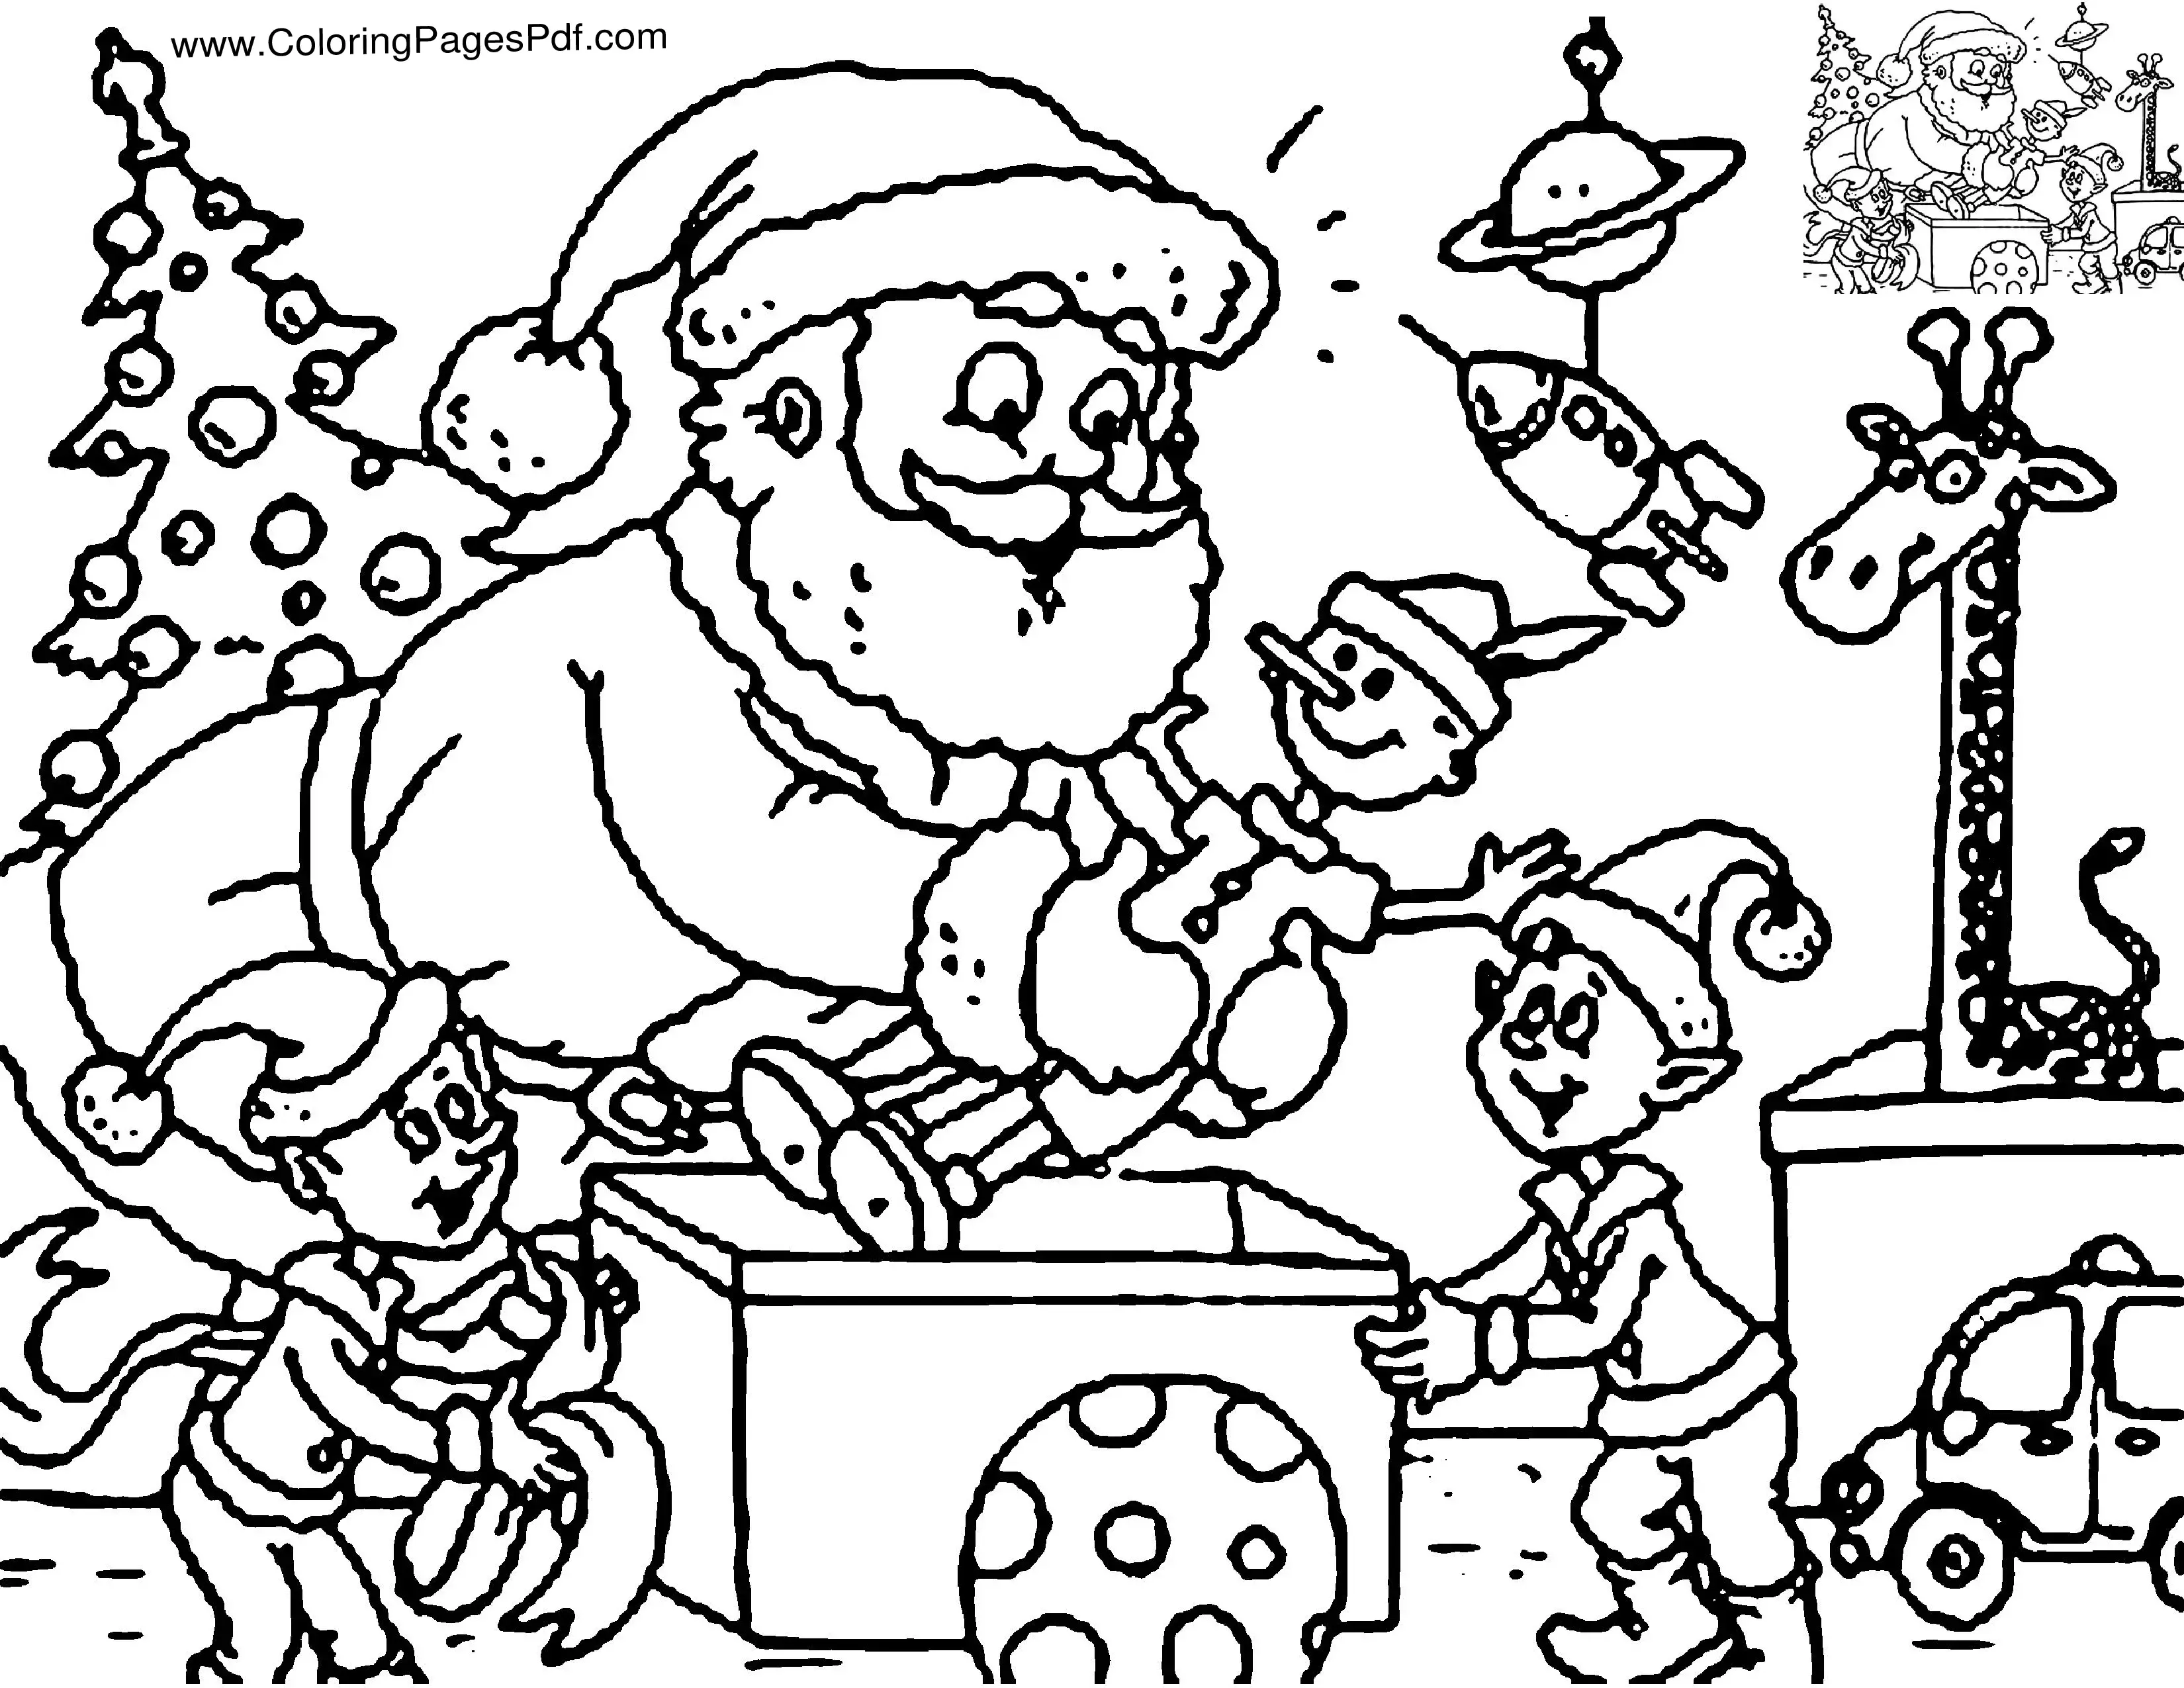 Elf sized coloring sheets